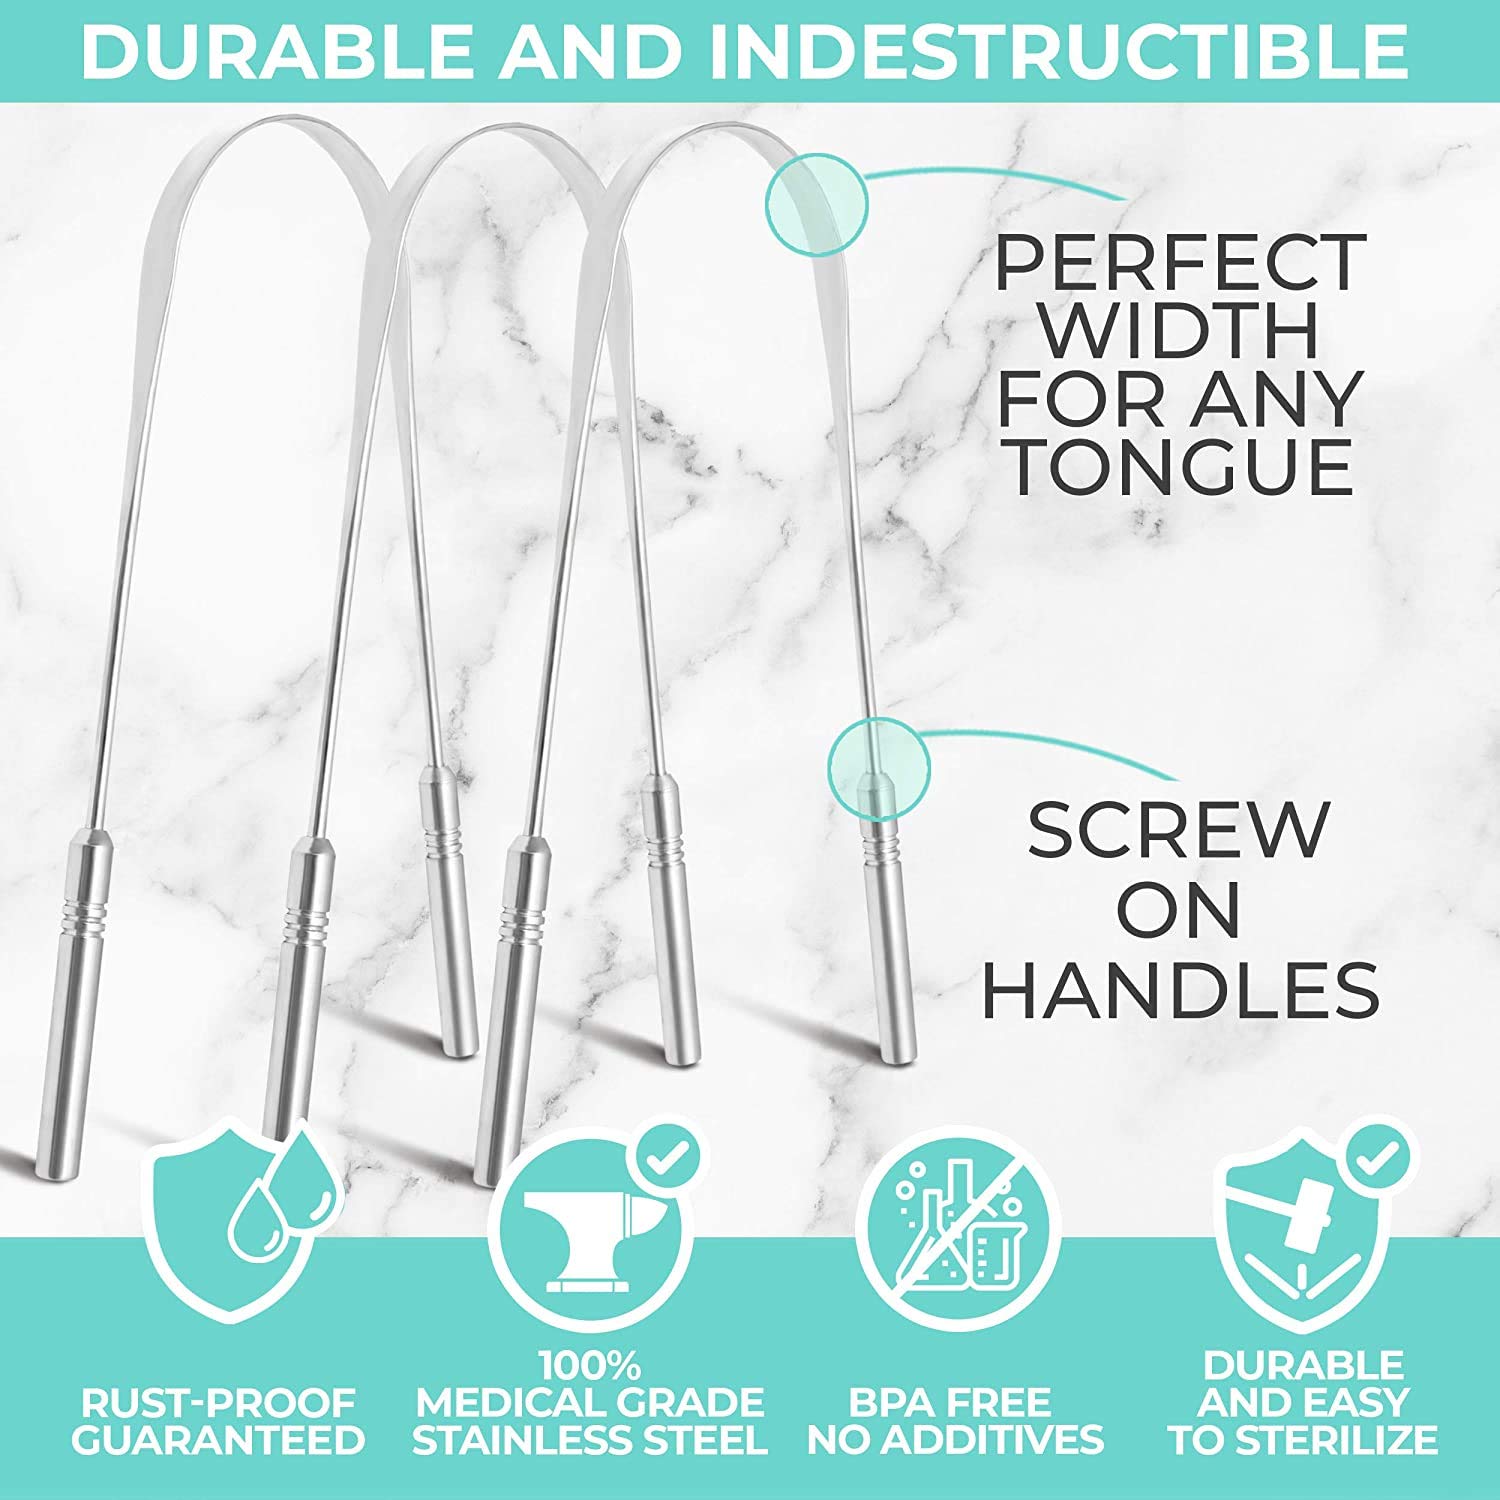 NJ Stainless Steel Tongue Scraper, Reduce Bad Breath with Medical Grade Stainless Steel Tongue Cleaners, 100% BPA Free Metal Tongue Scrapers for Fresher Breath in Seconds: 3 Pcs